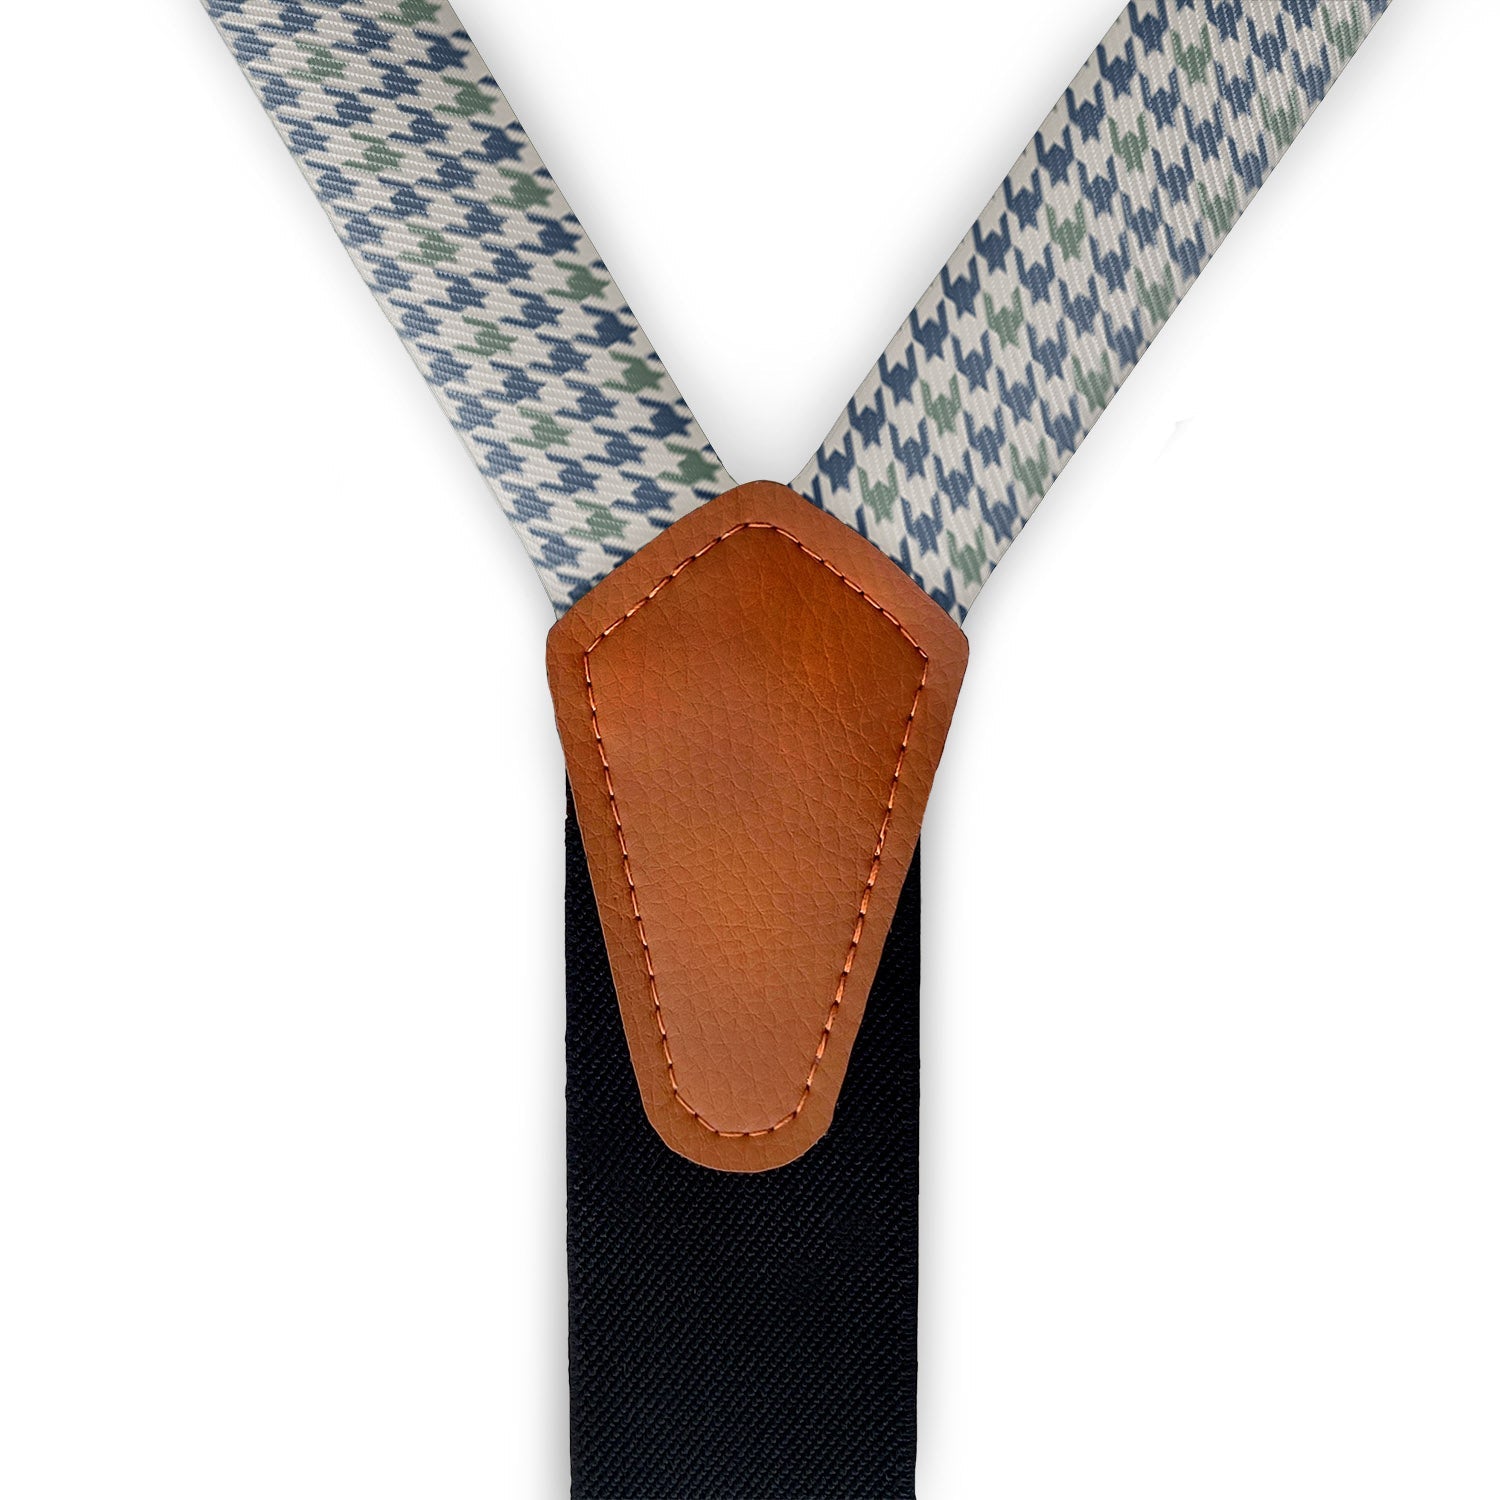 Houndstooth Suspenders -  -  - Knotty Tie Co.